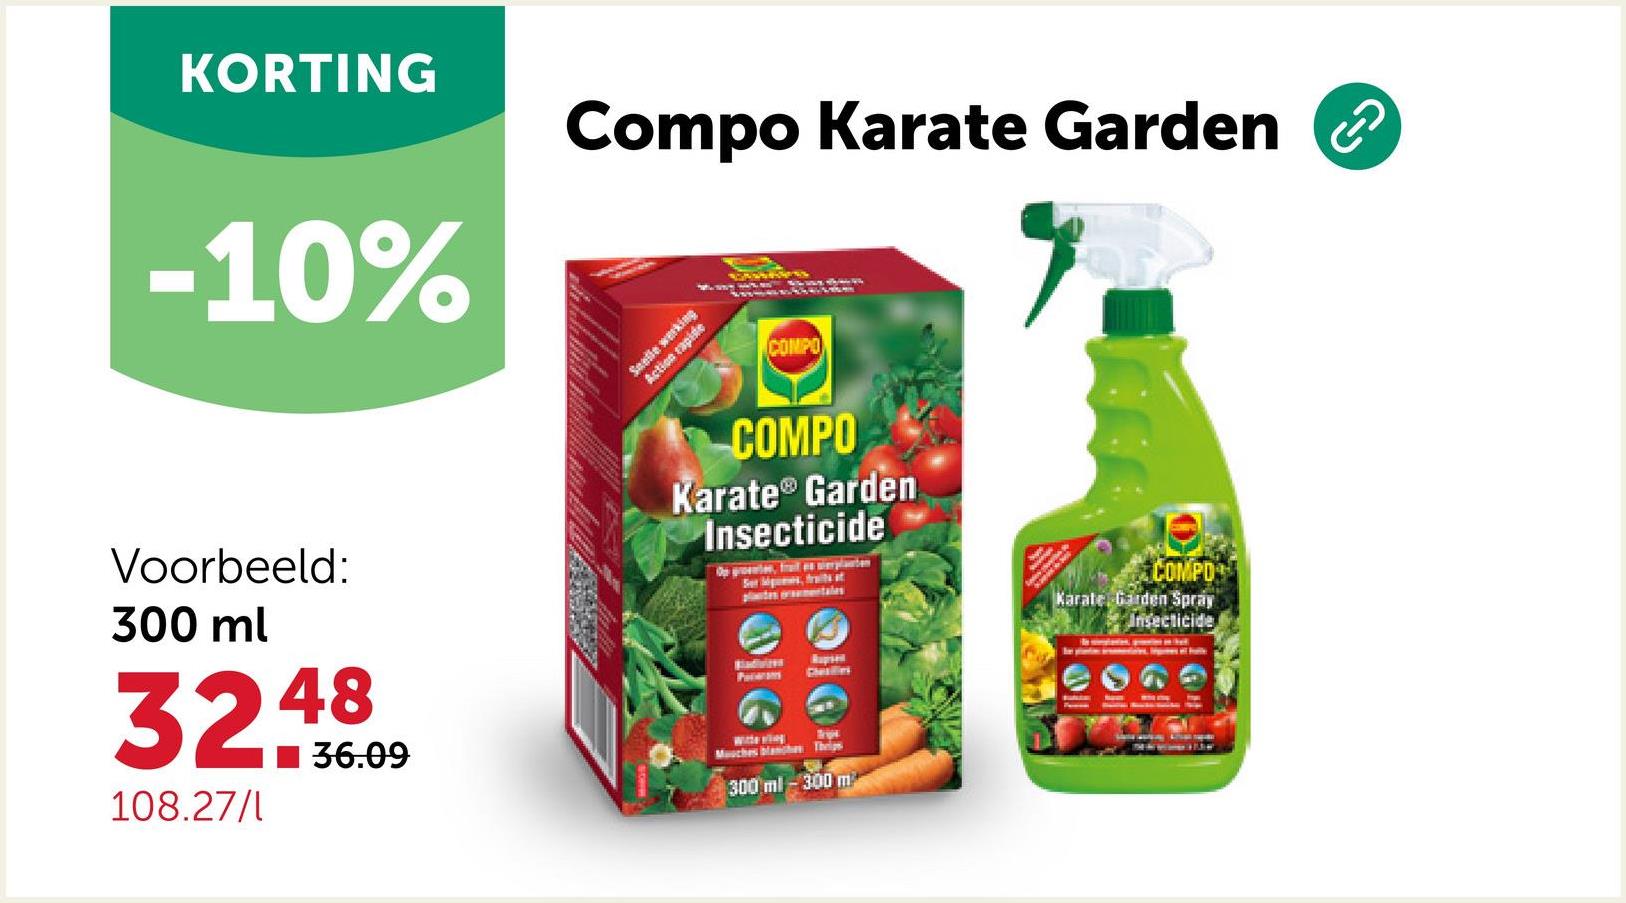 KORTING
-10%
Compo Karate Garden ②
Seelle werking
Action rapide
COMPO
Voorbeeld:
300 ml
32.49809
108.27/1
COMPO
Karate® Garden
Insecticide
Ser Mips, traits af
plates
tales
Pataram
Rupsen
Clealles
OIGHT
Witte ving
Tript
Mouches blanches Thrips
300 ml-300 m
વા
COMPO
Karate Garden Spray
Insecticide